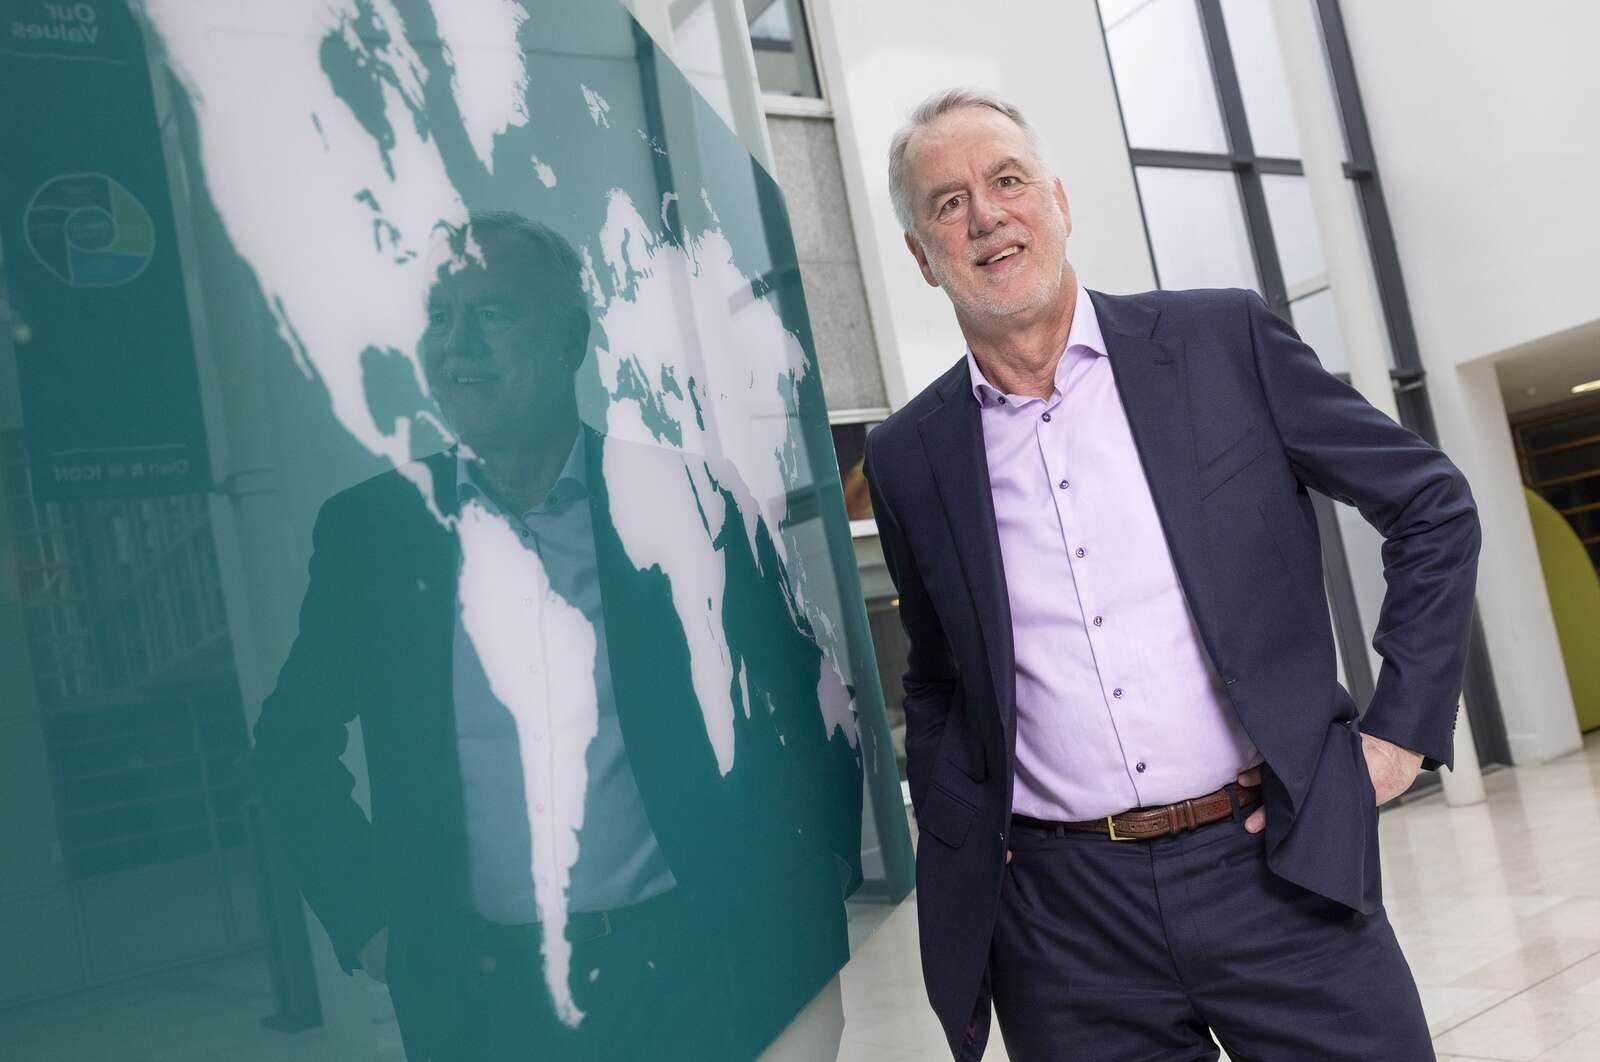 Headquartered in Dublin, the company is forecasting full-year revenues of between $8.4bn to $8.7bn